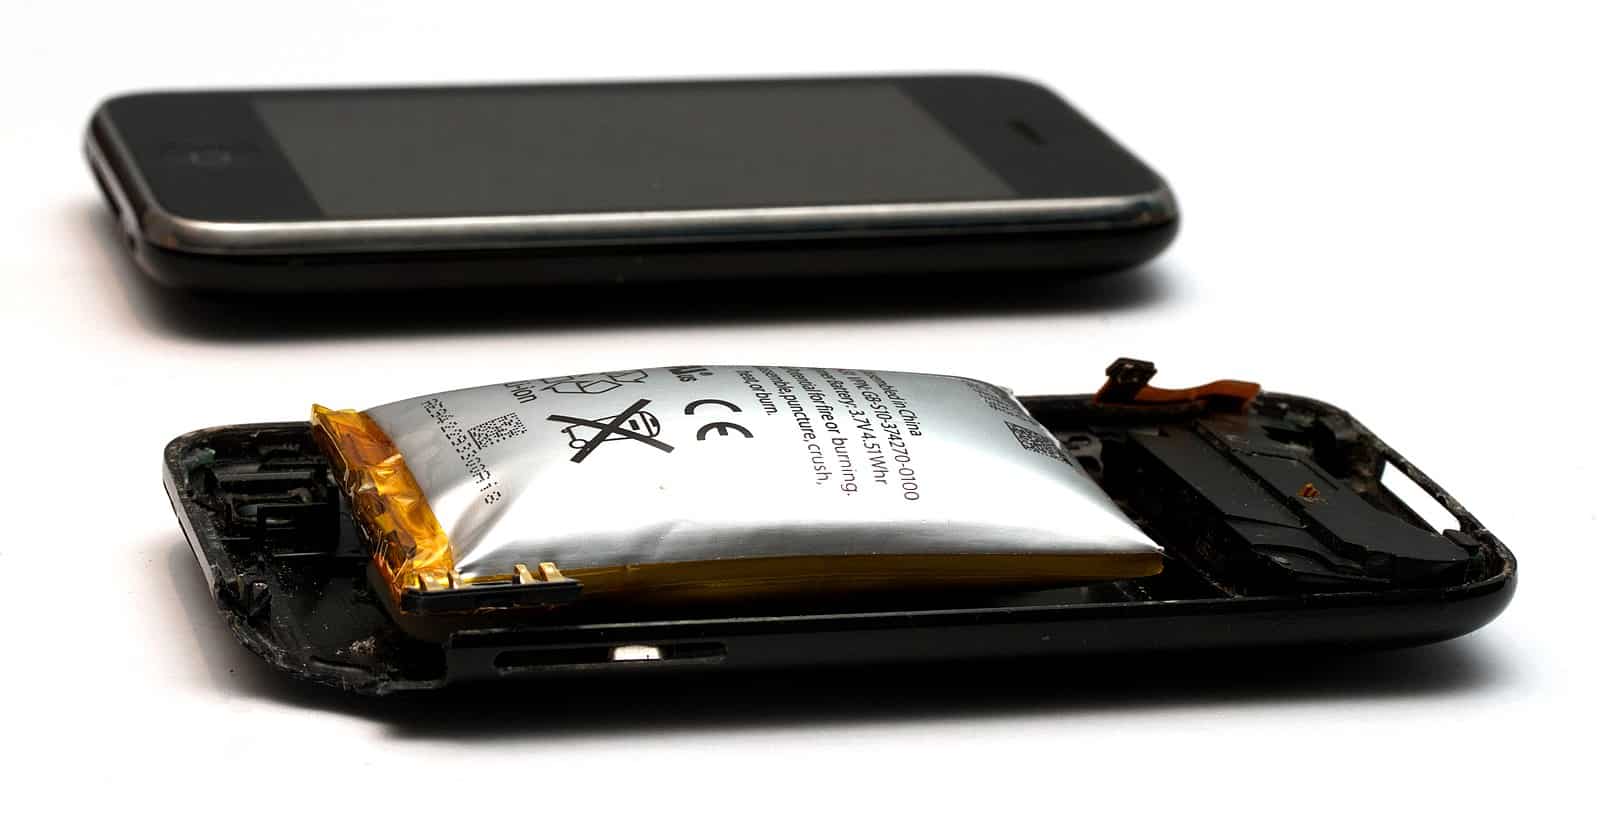 pin_lithium-ion_polymer_battery_from_an_Apple_iPhone_3GS